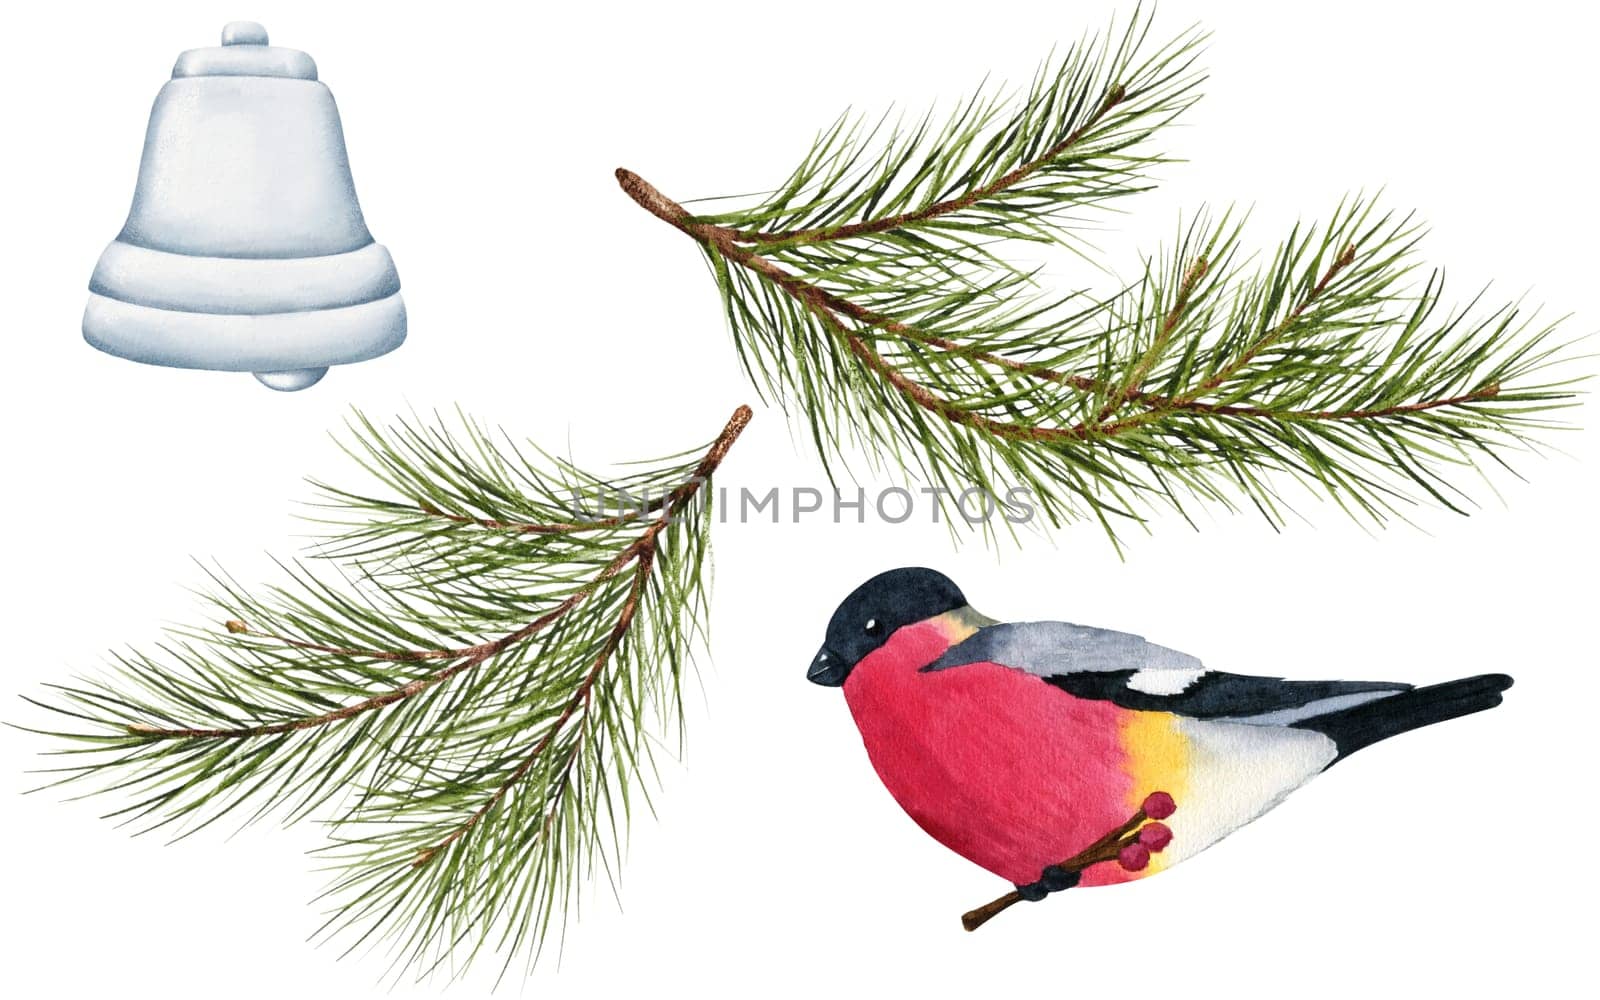 A Christmas collection of elements. Red-breasted robin abundant pine branches and a gleaming silver bell. Isolated watercolor digital illustrations. Set for stickers, packaging, cards, invitations.